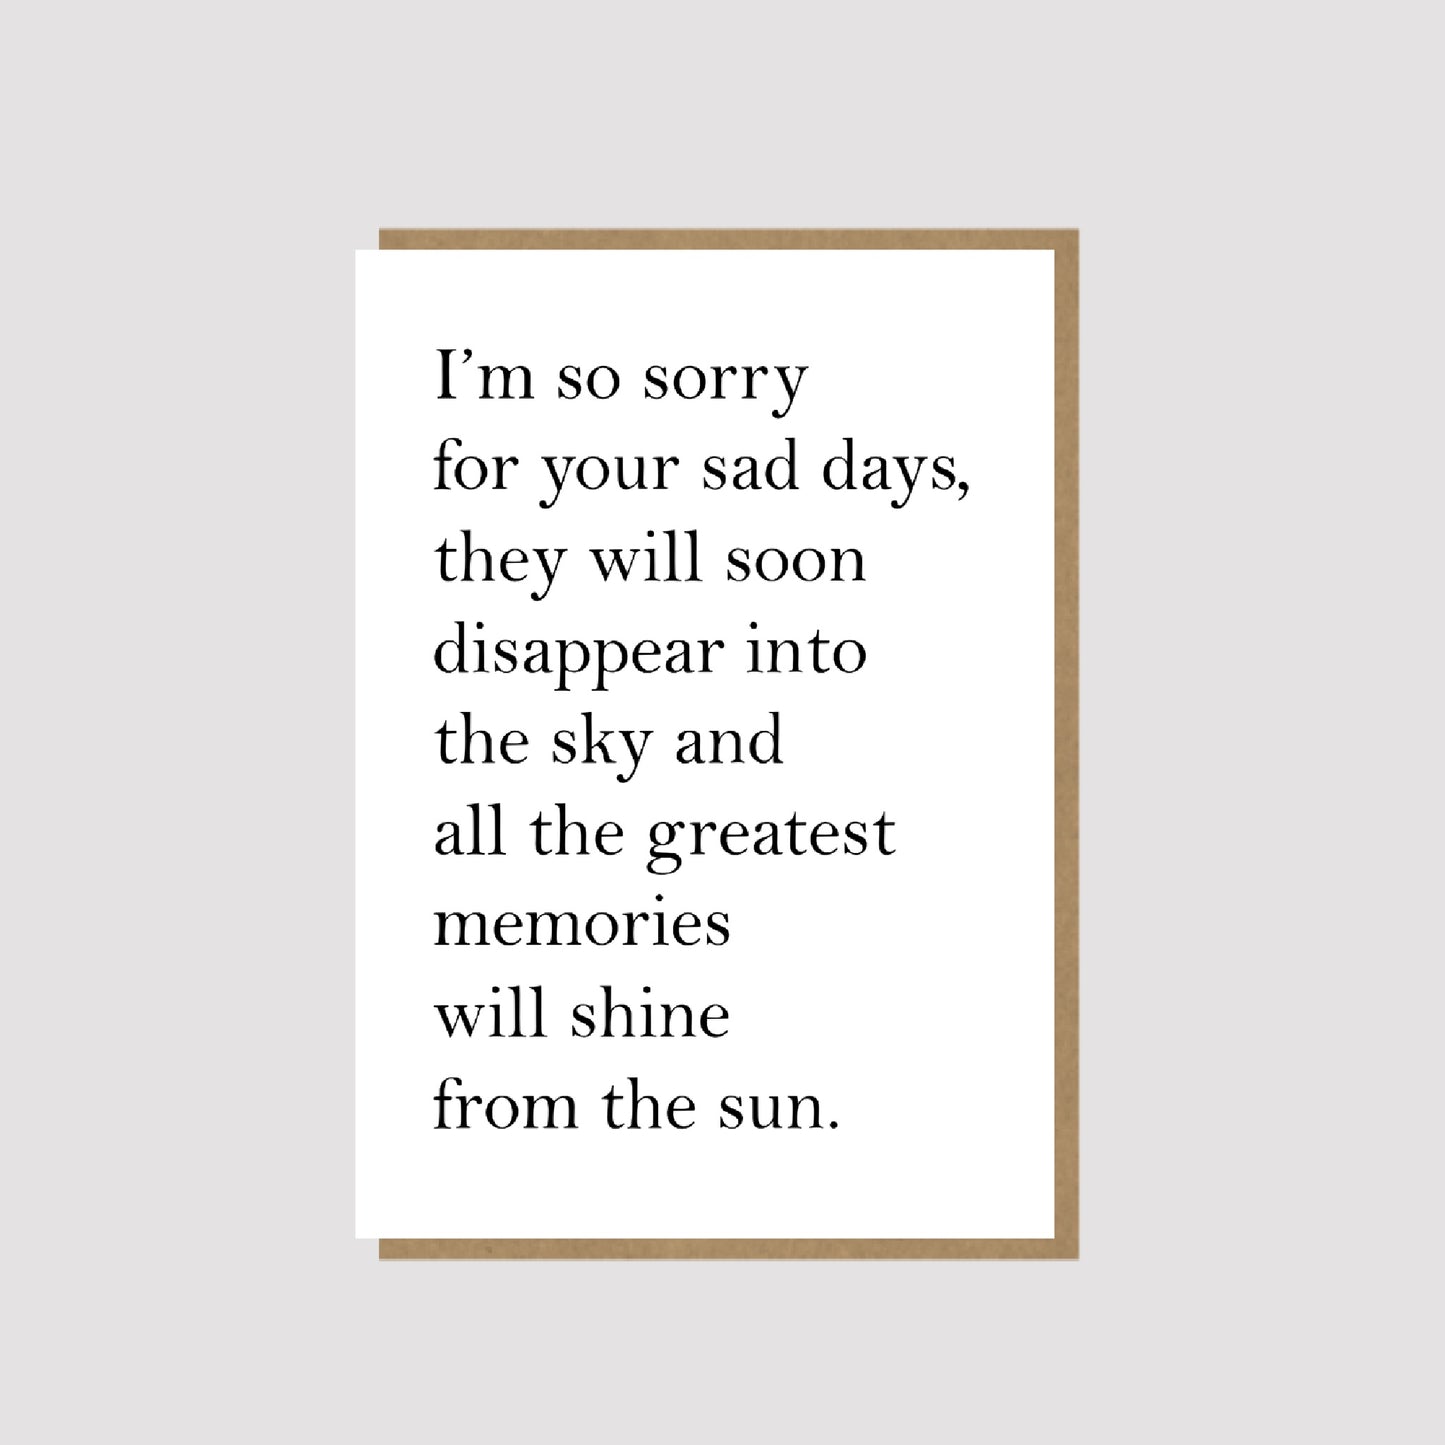 Sorry for your sad days